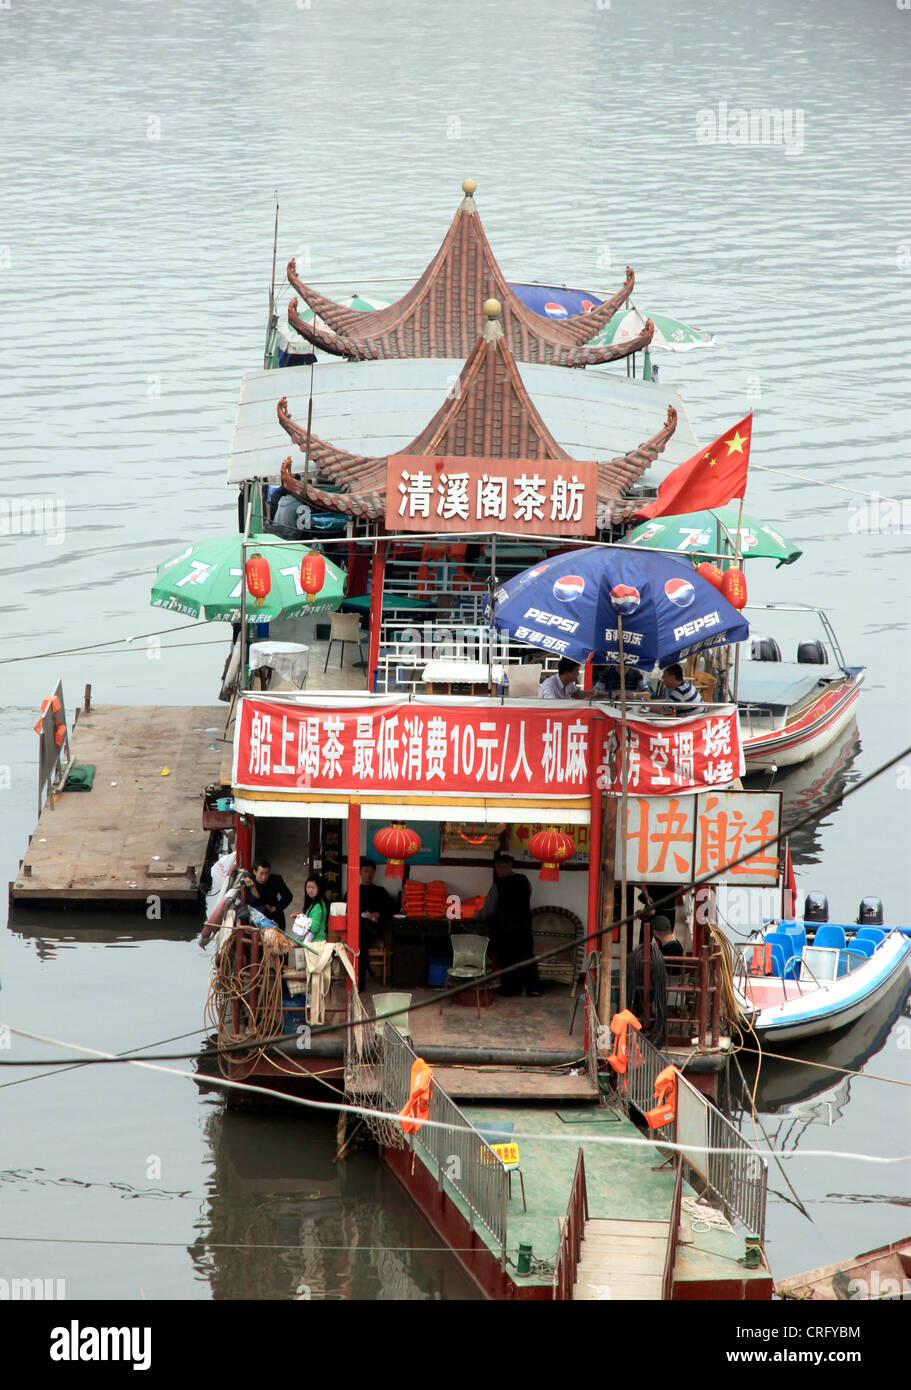 A traditional Chinese boat serving as a restaurant on the Yangtze River Stock Photo